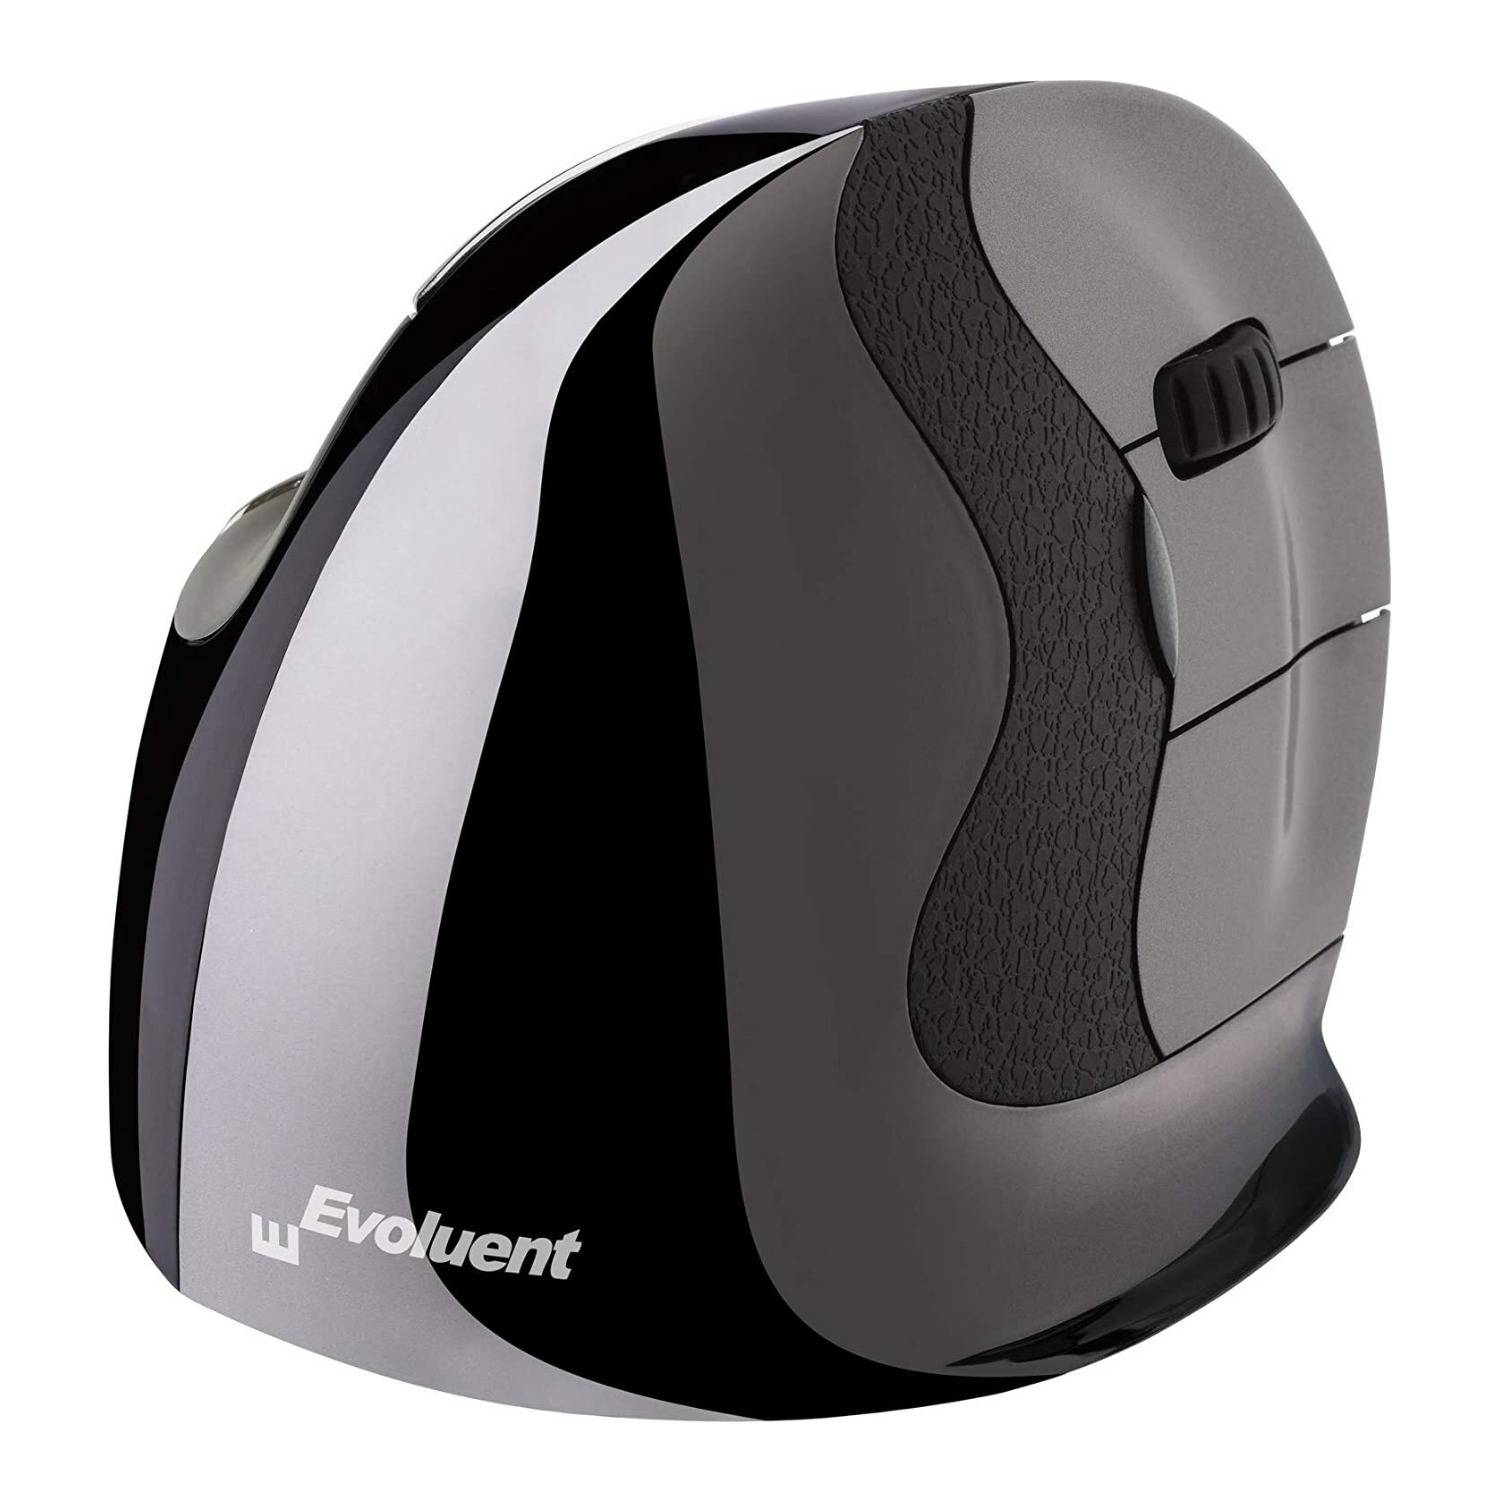 Evoluent VMDLW VerticalMouse D Right Hand Ergonomic Wireless Mouse (Large)